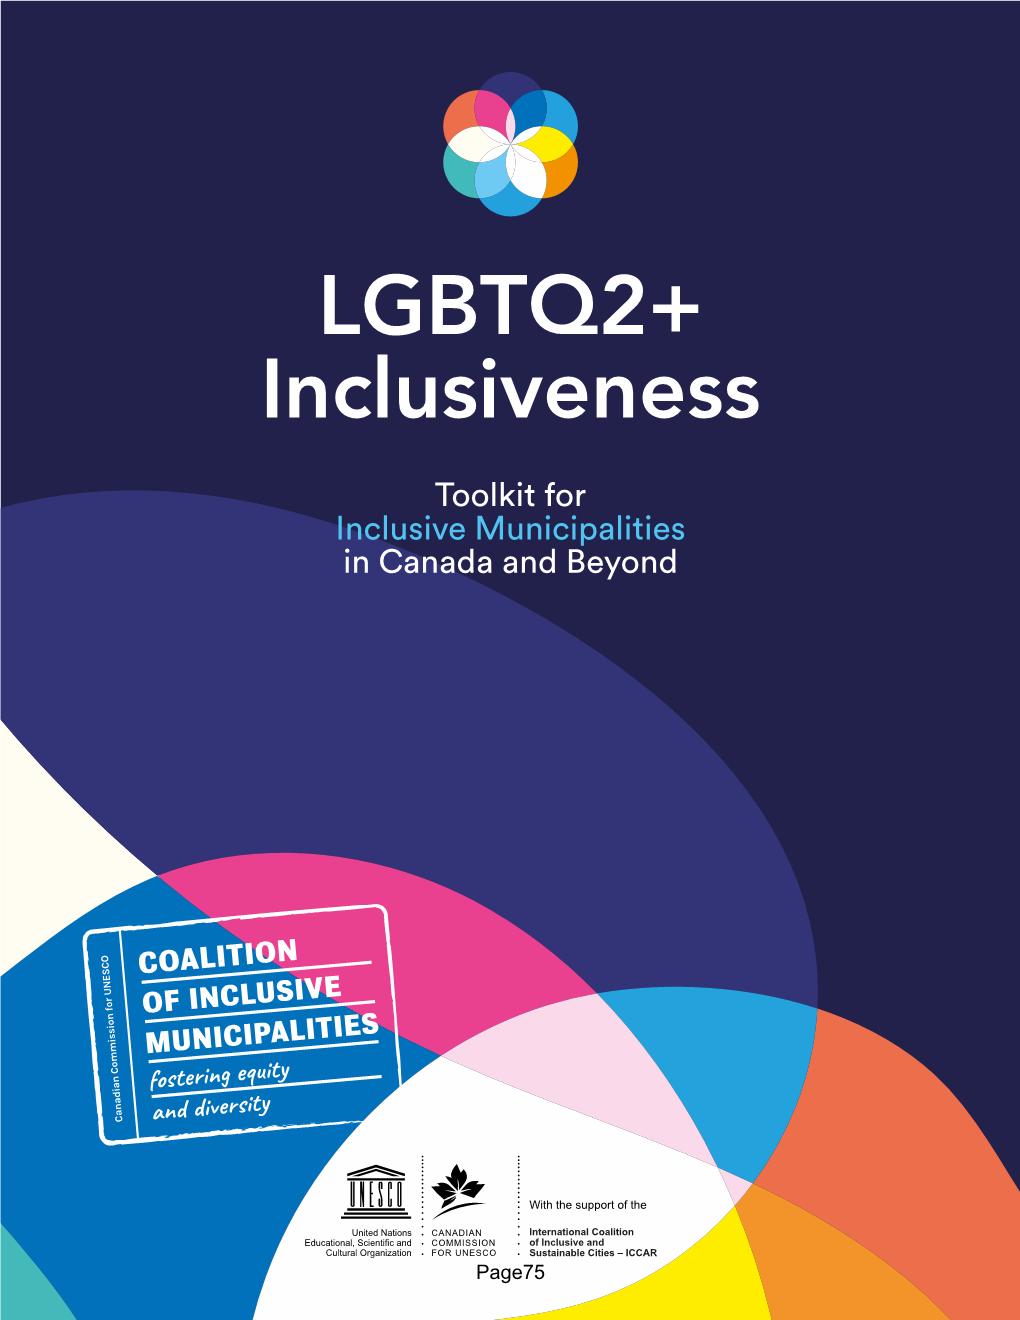 LGBTQ2+ Inclusiveness Toolkit for Inclusive Municipalities in Canada and Beyond